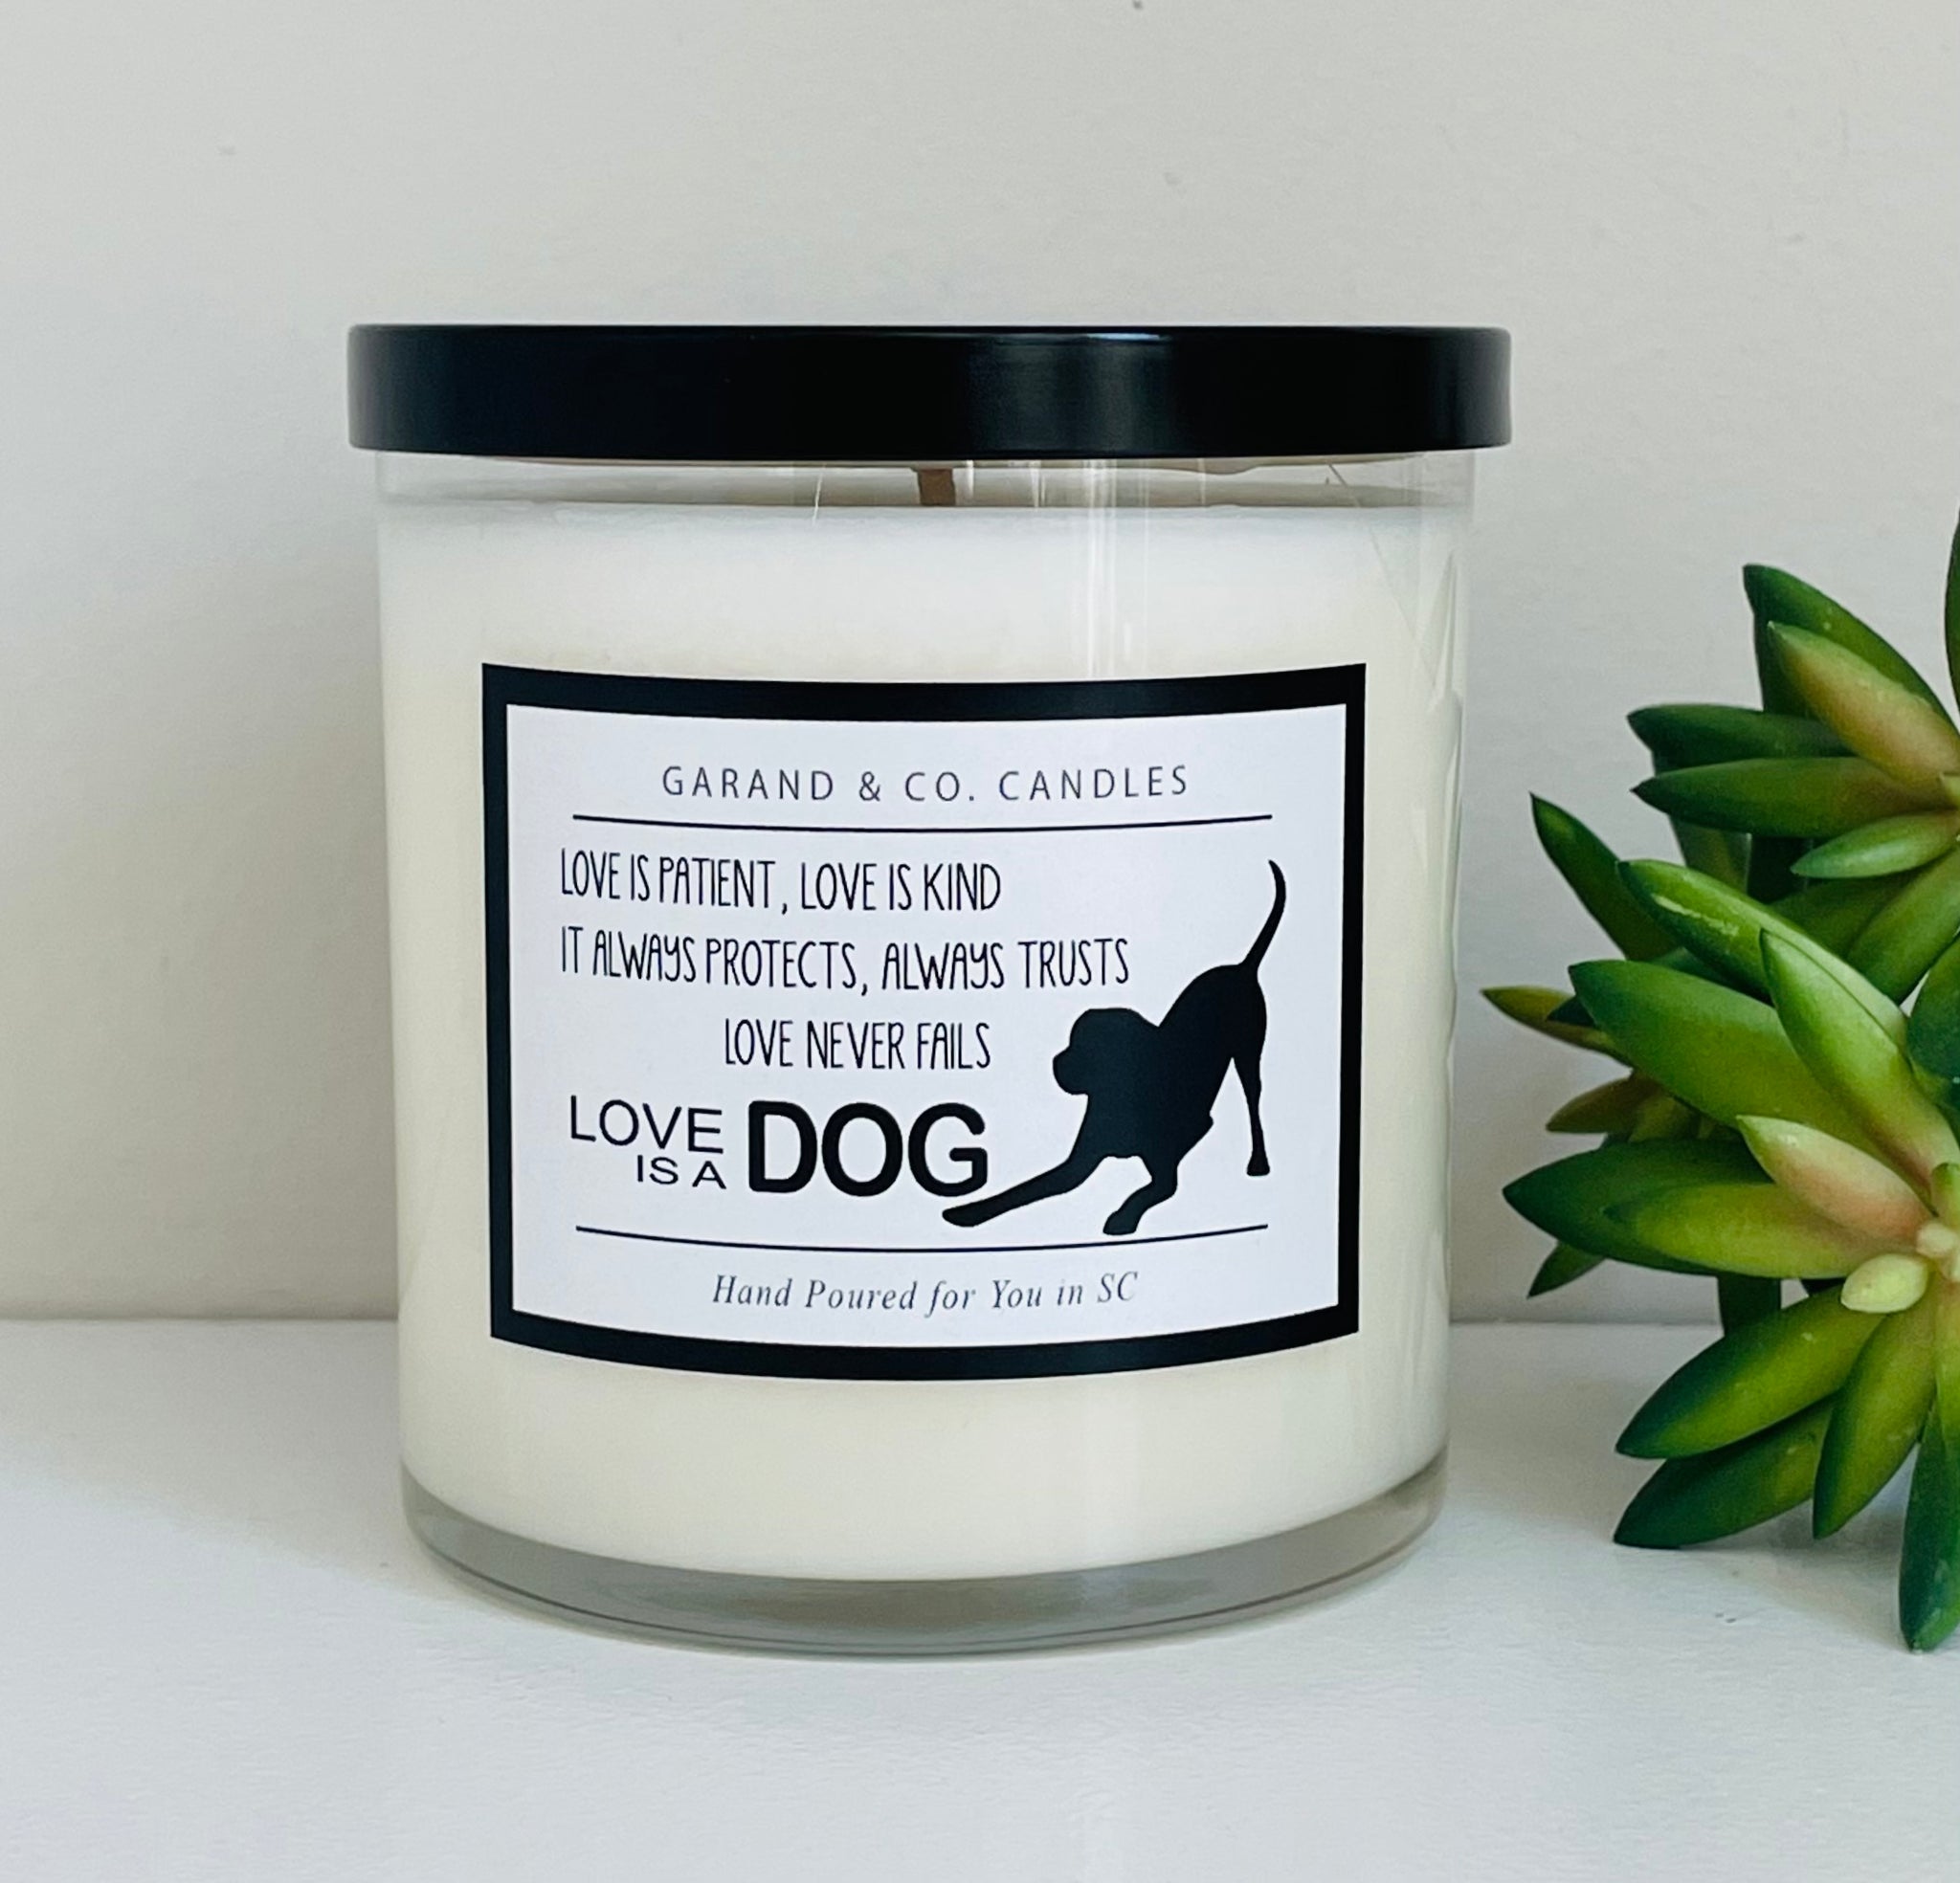 12 oz Clear Glass Jar Candle - Love is a Dog